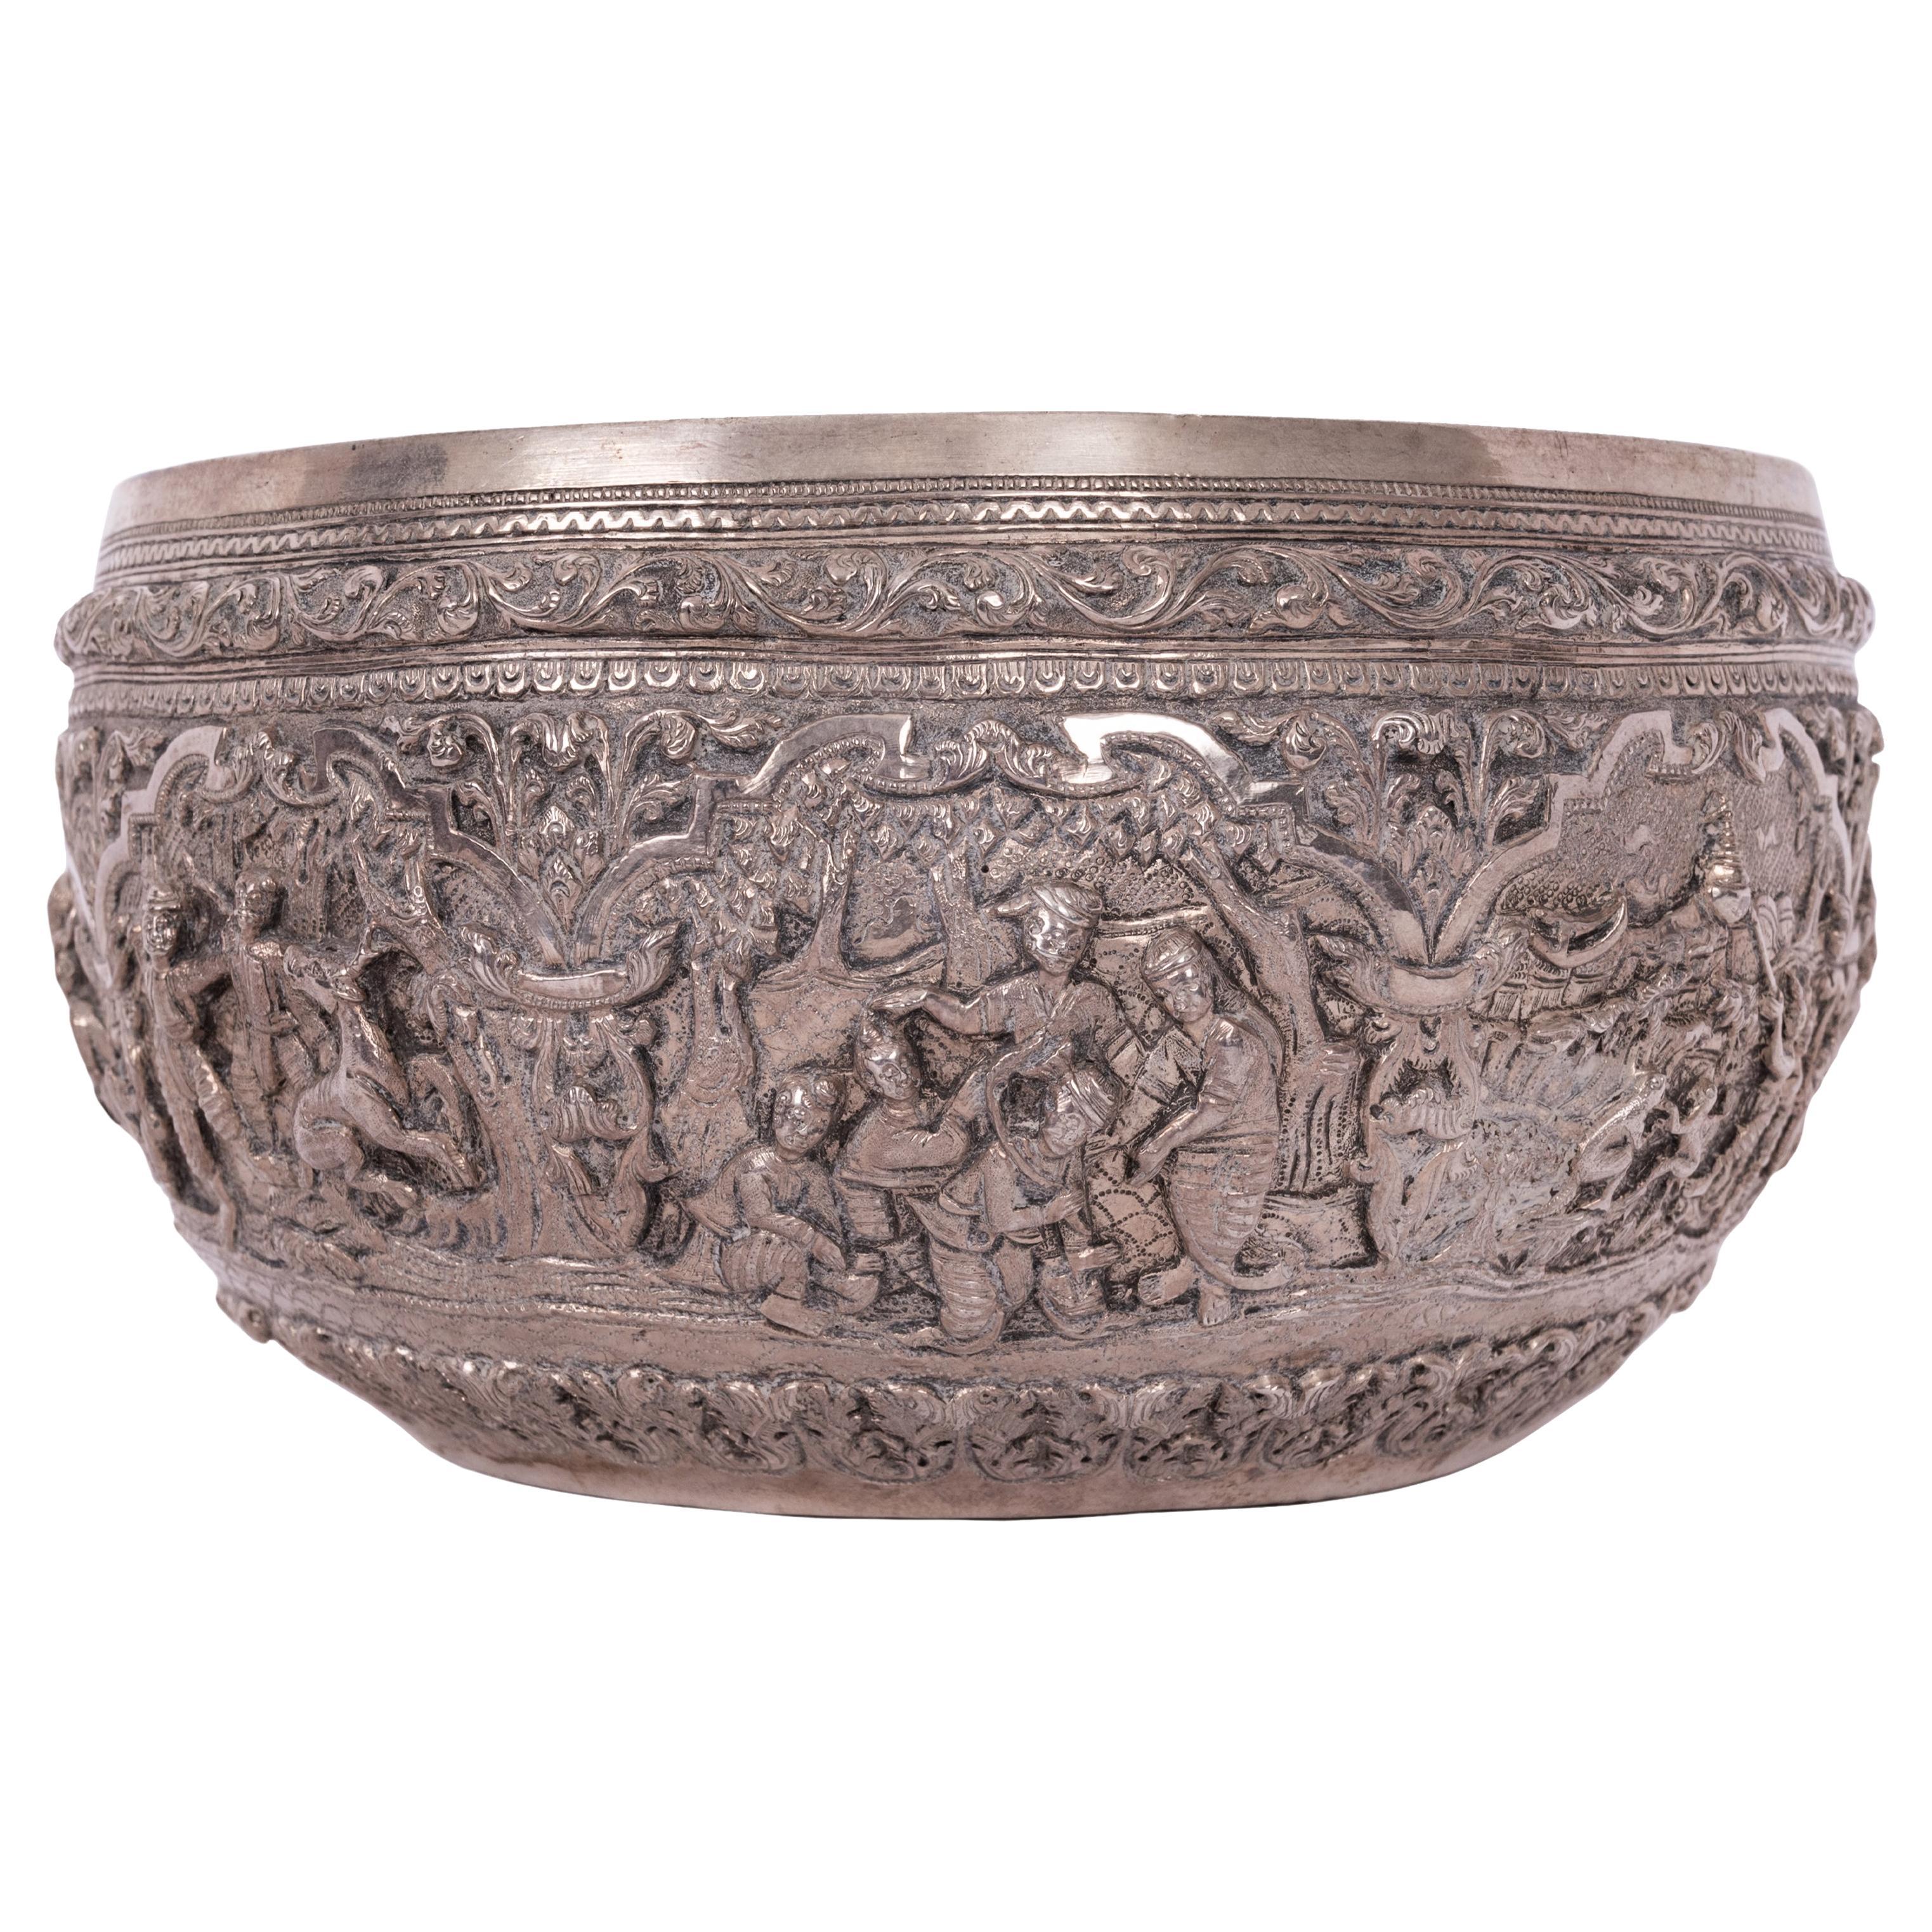 Antique Burmese Repousse Silver Buddhist Thabeik Offering Bowl Guanyin Mark 1890 For Sale